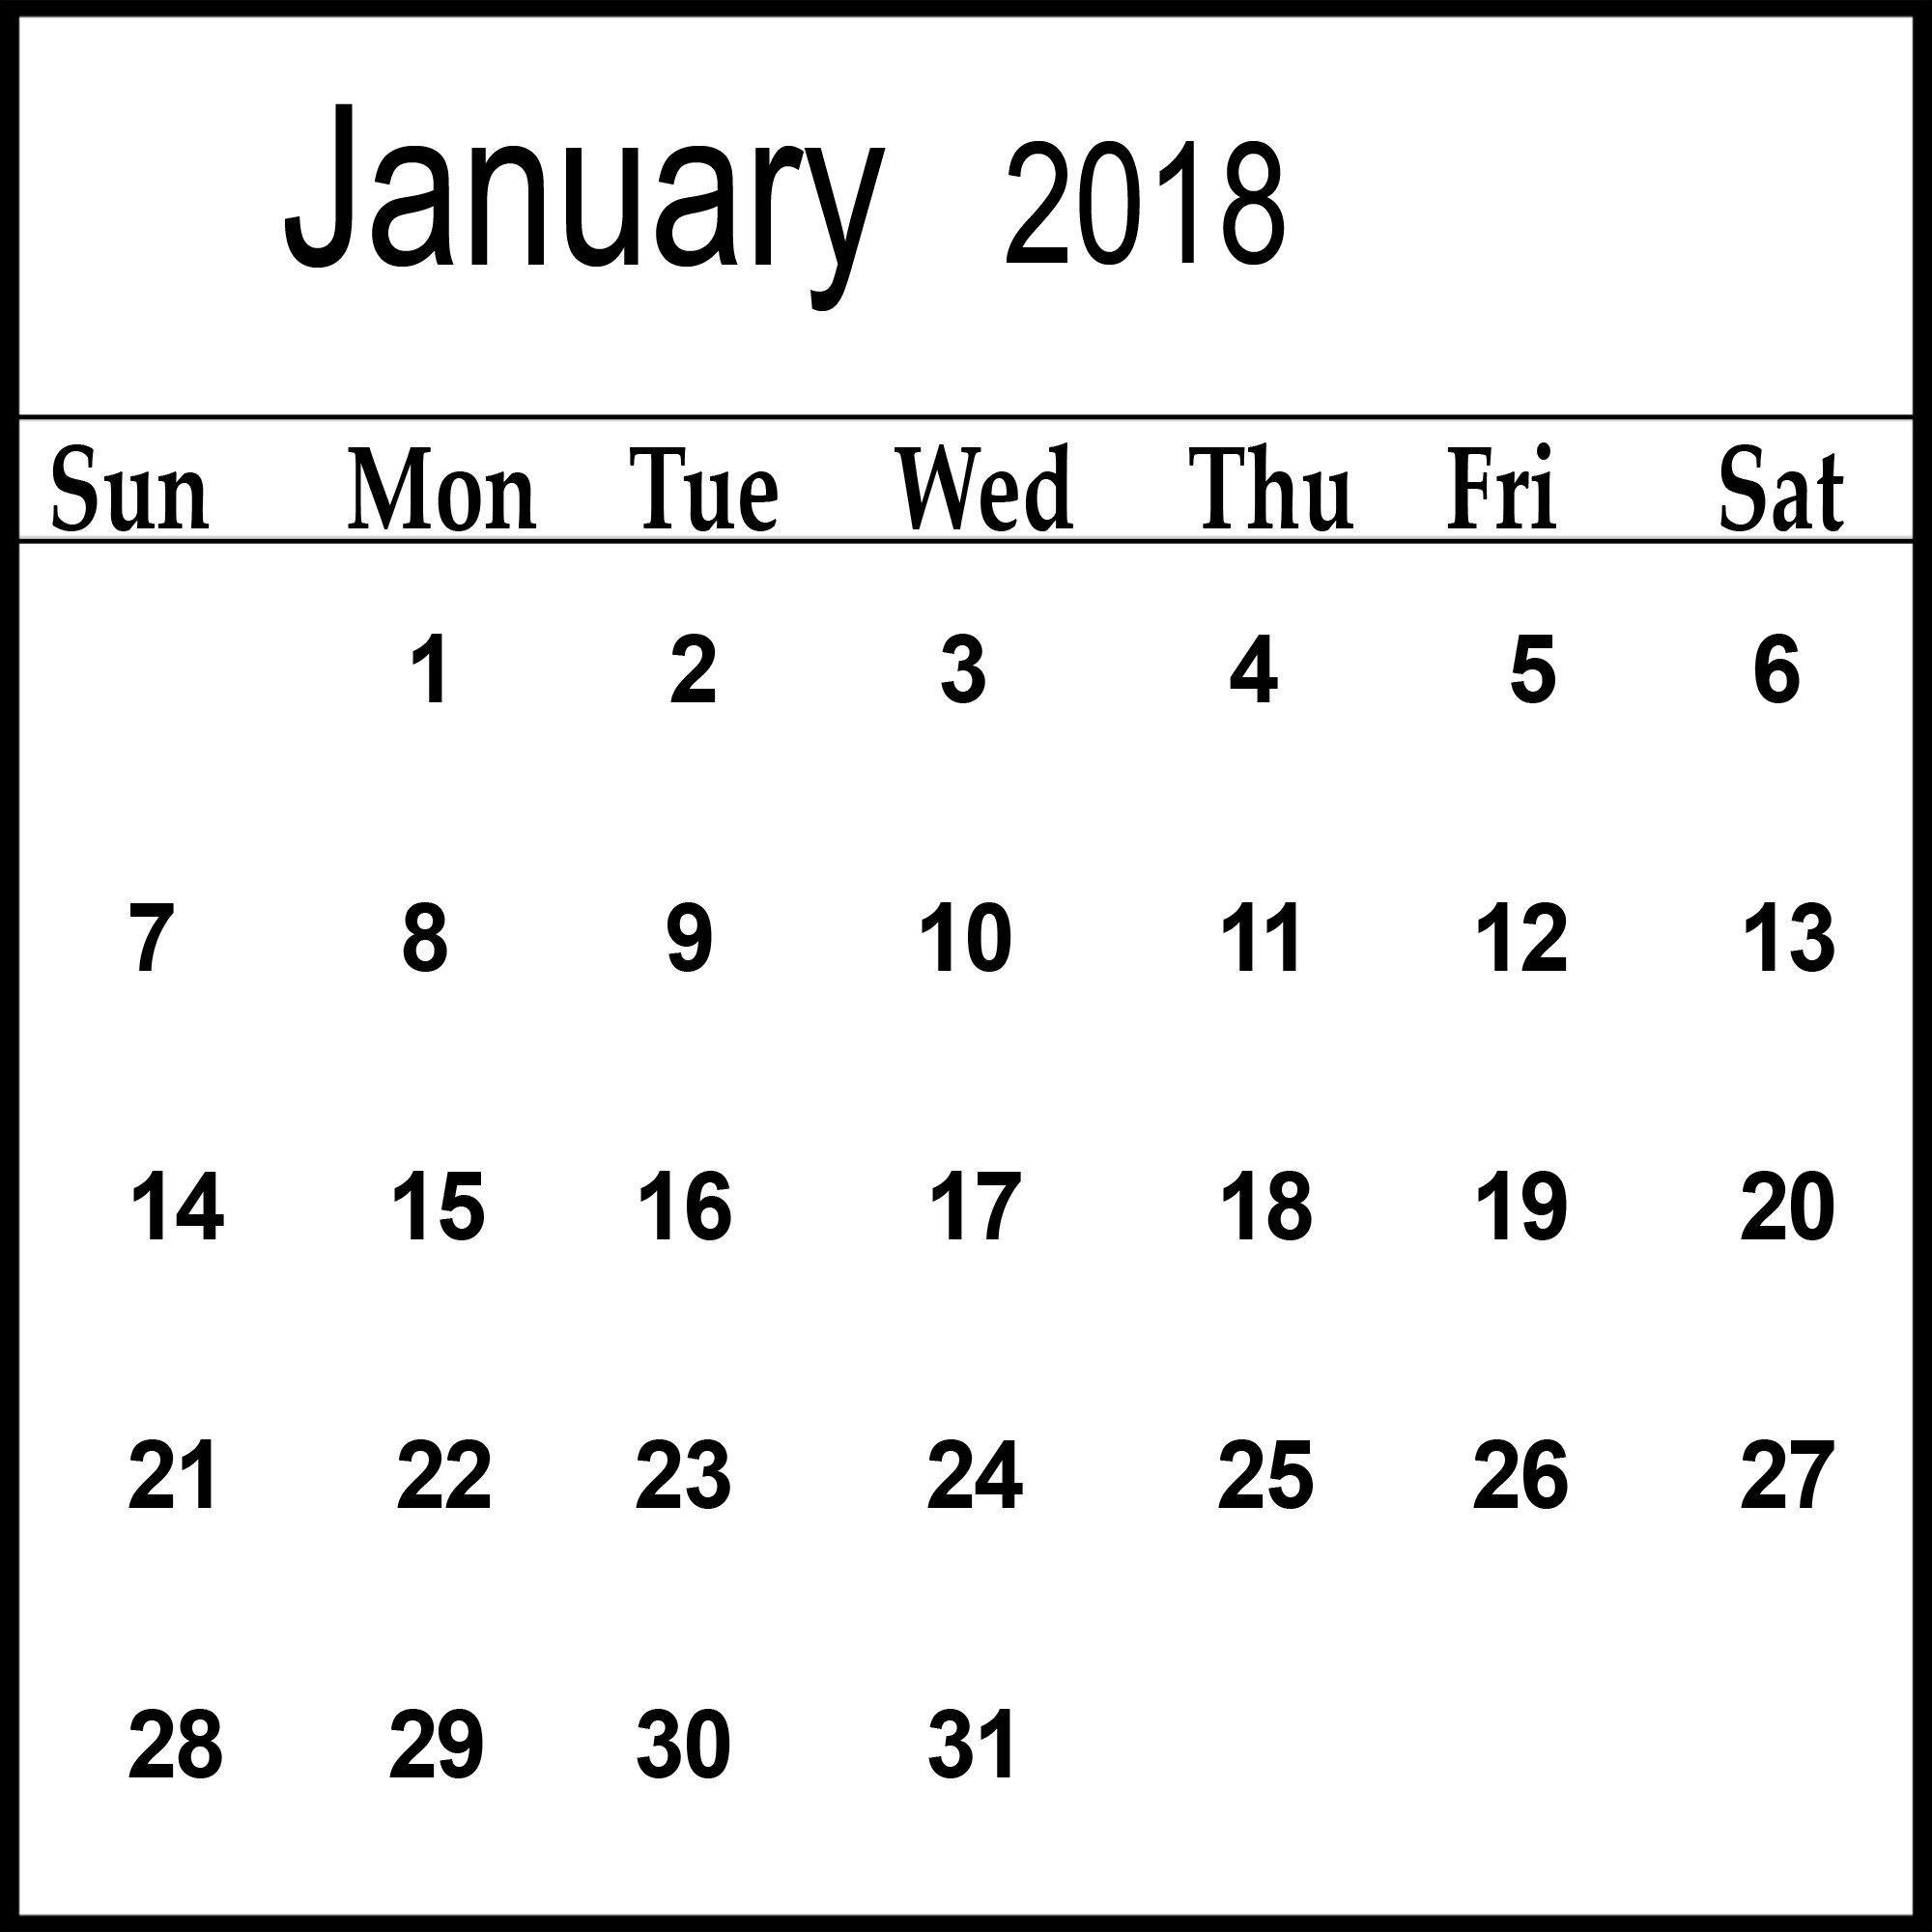 2018-calendar-templates-and-images